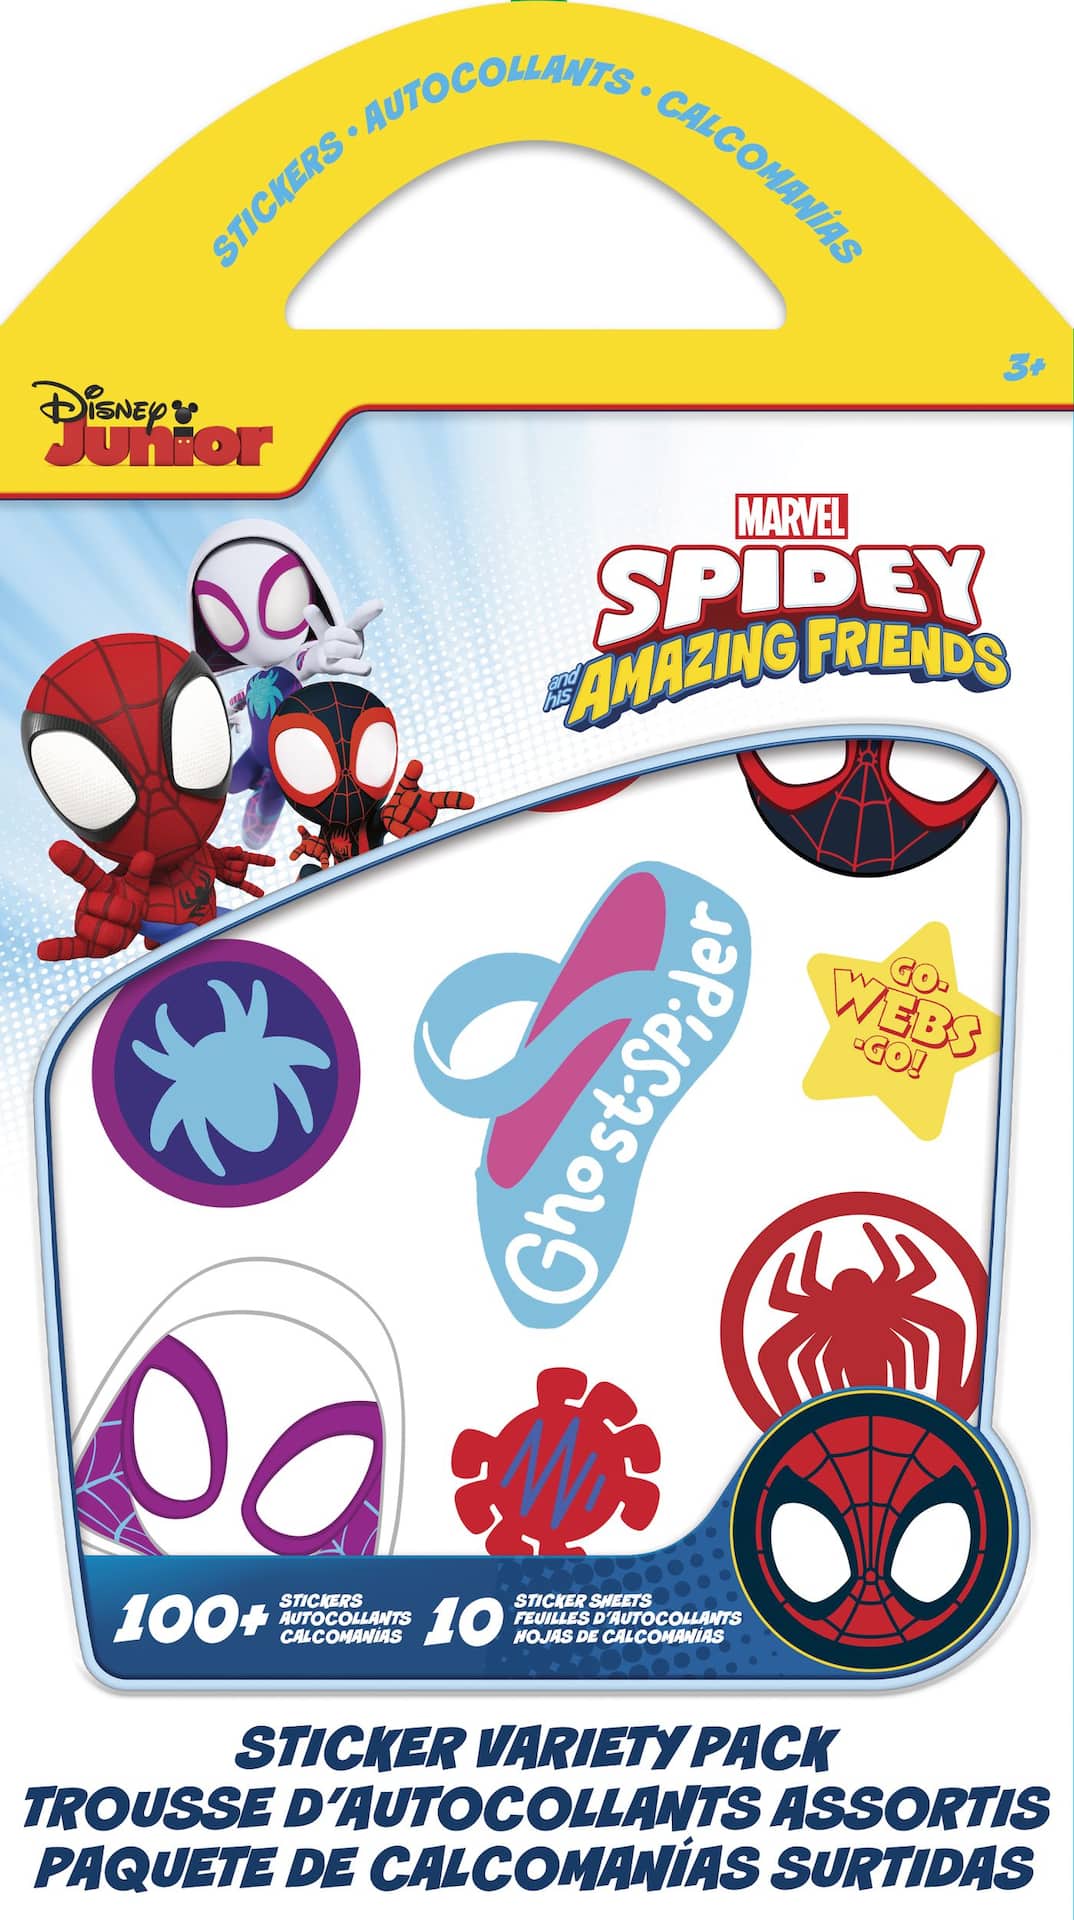 https://media-www.canadiantire.ca/product/automotive/party-city-everyday/party-city-fun/8539896/spidey-and-his-amazing-friends-sticker-variety-pack-0d36b897-30cb-4677-bdfd-2b713dd2b44f-jpgrendition.jpg